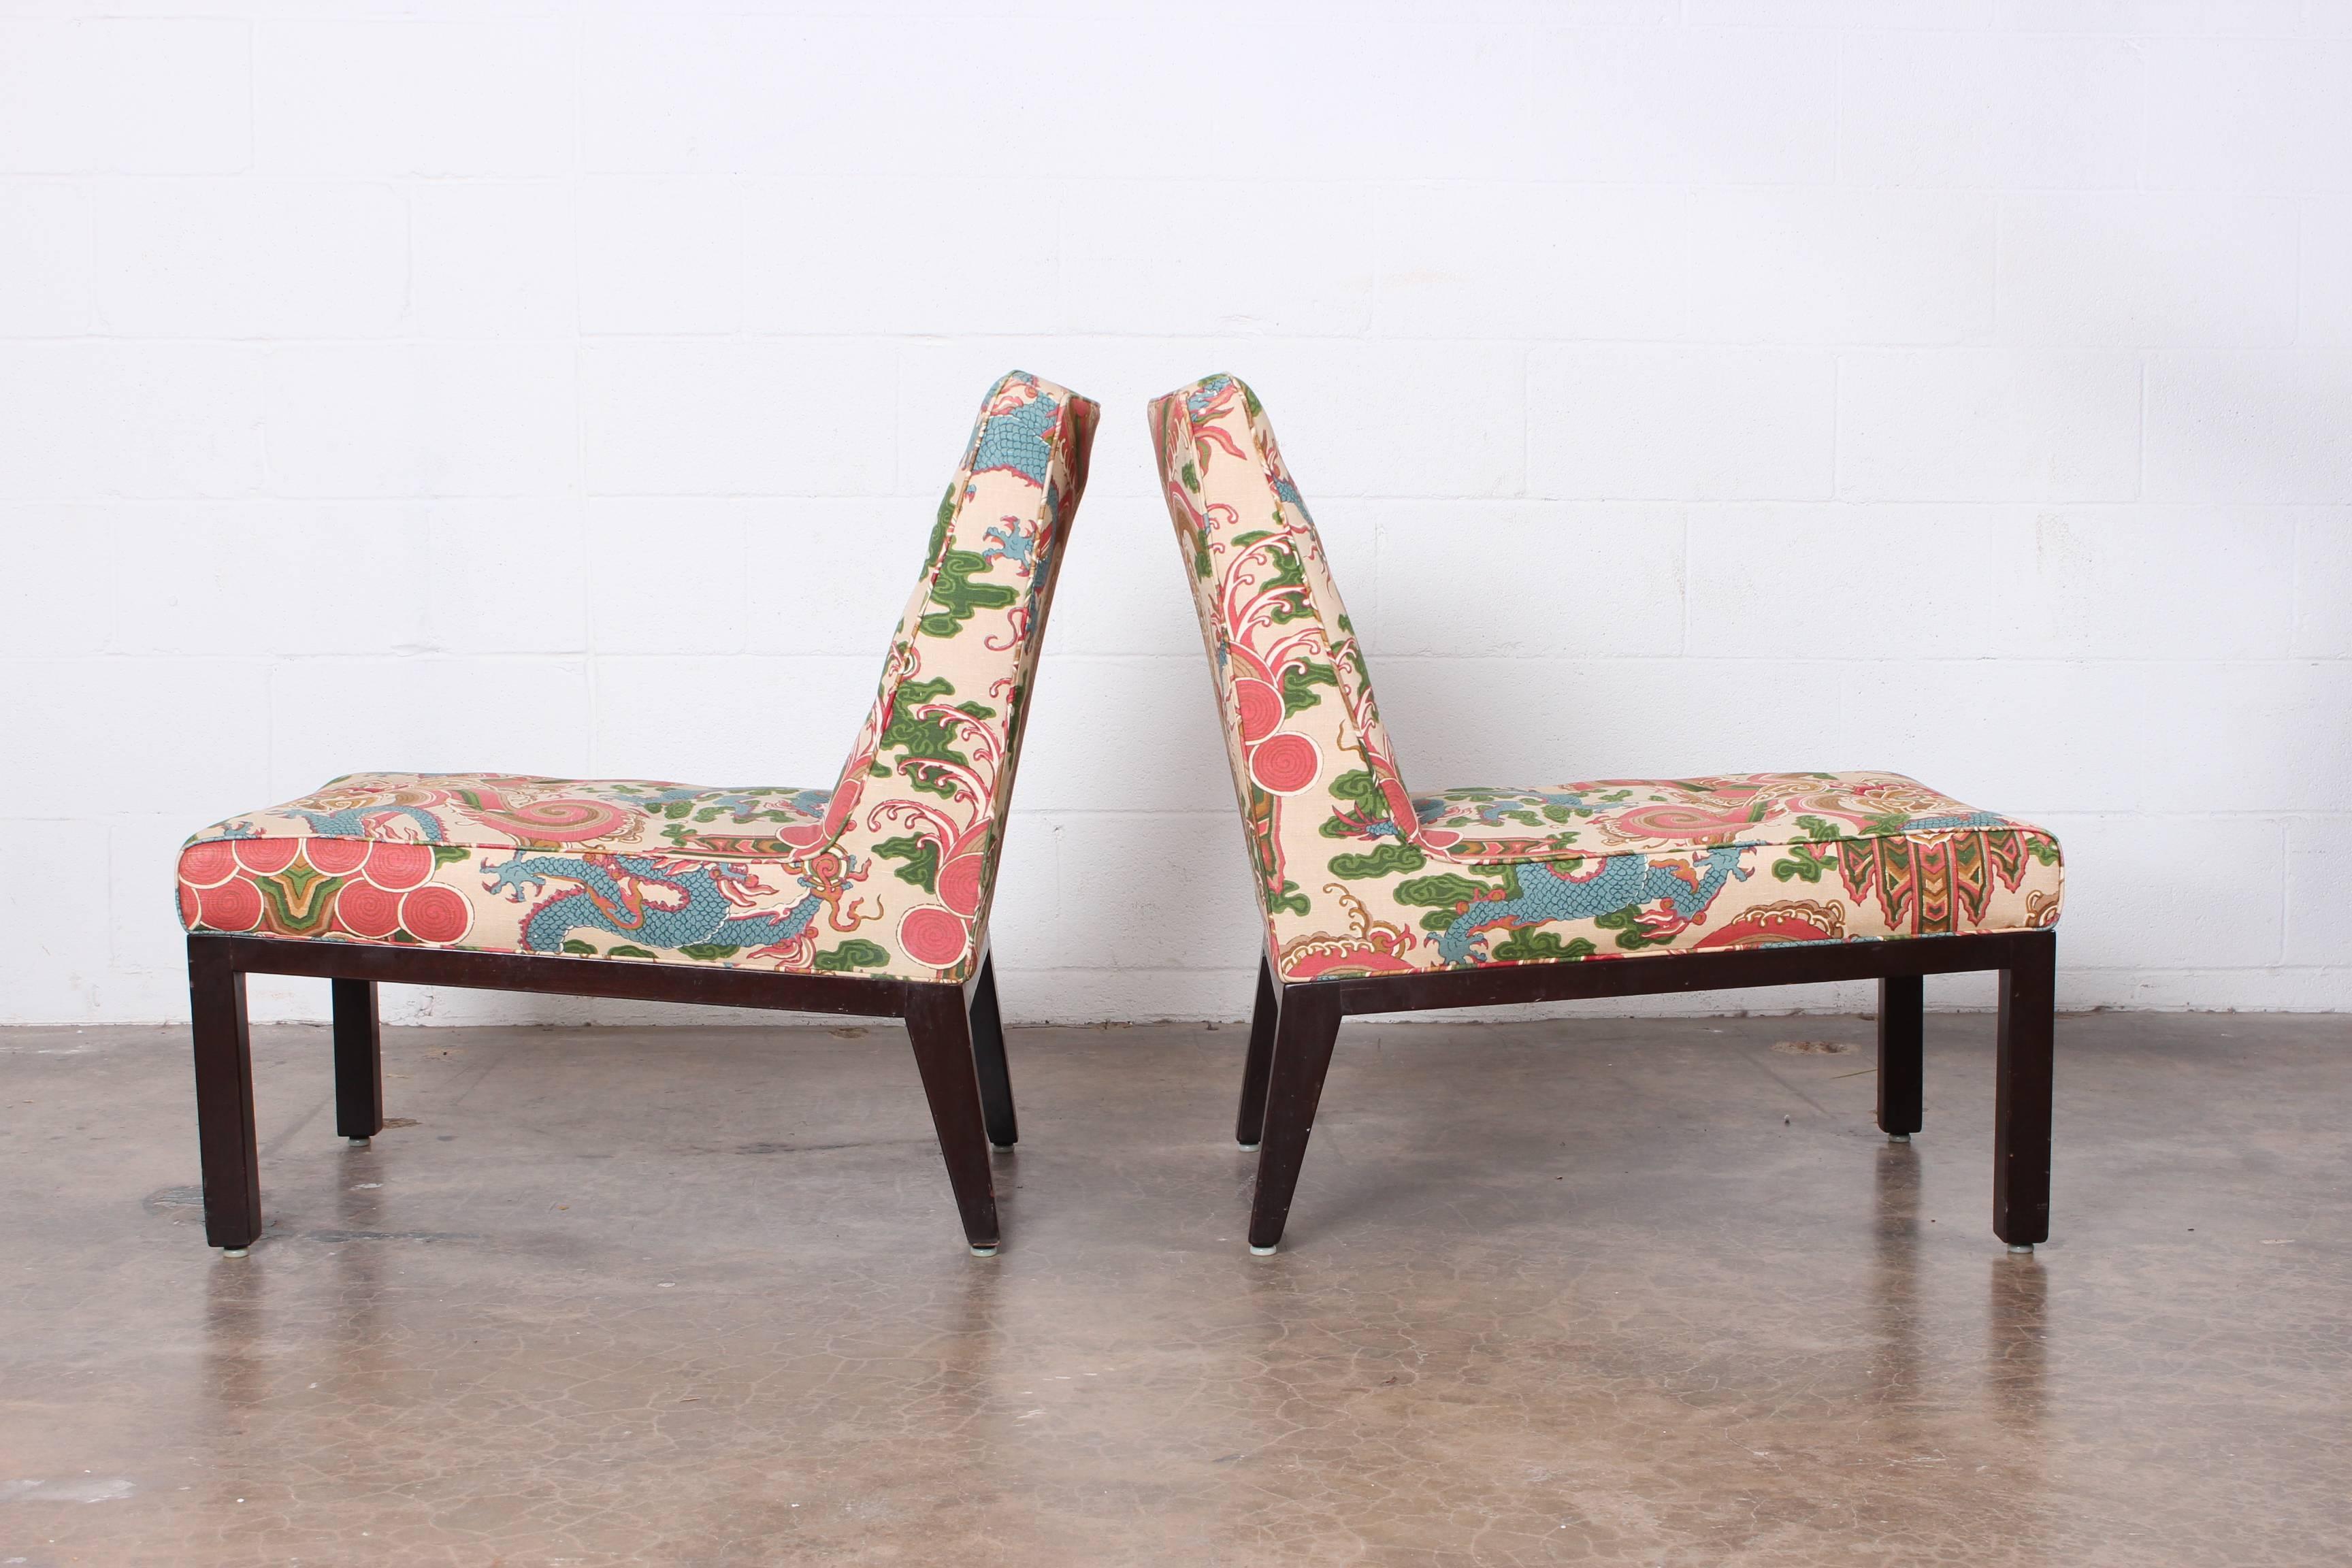 Mid-20th Century Pair of Slipper Chairs by Edward Wormley for Dunbar